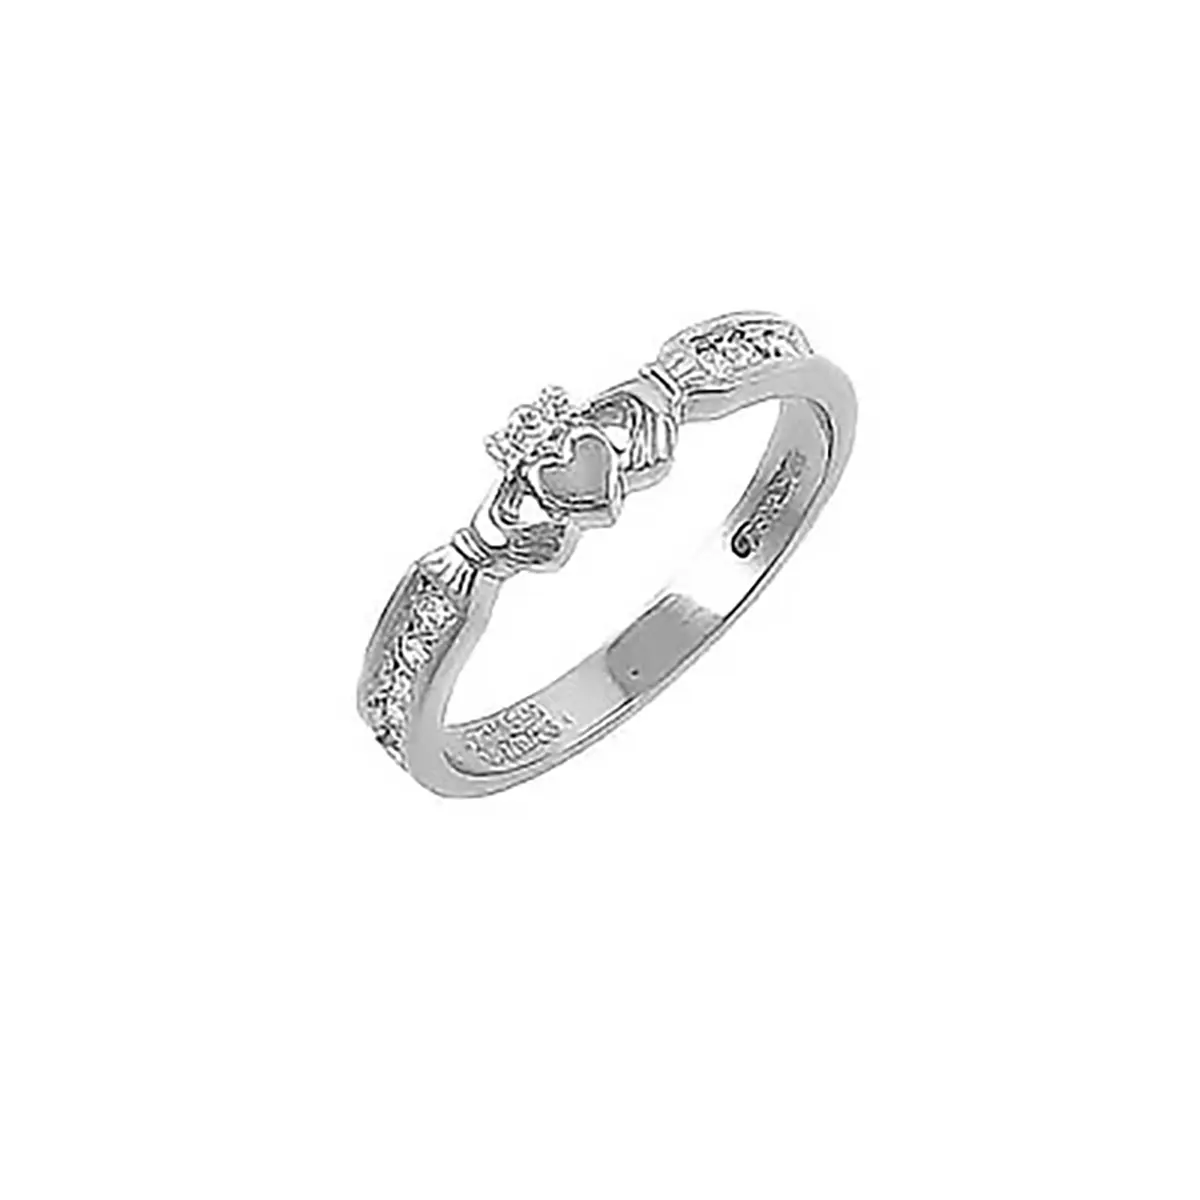 1_1_Claddagh Ring Wedding White Gold And Diamond